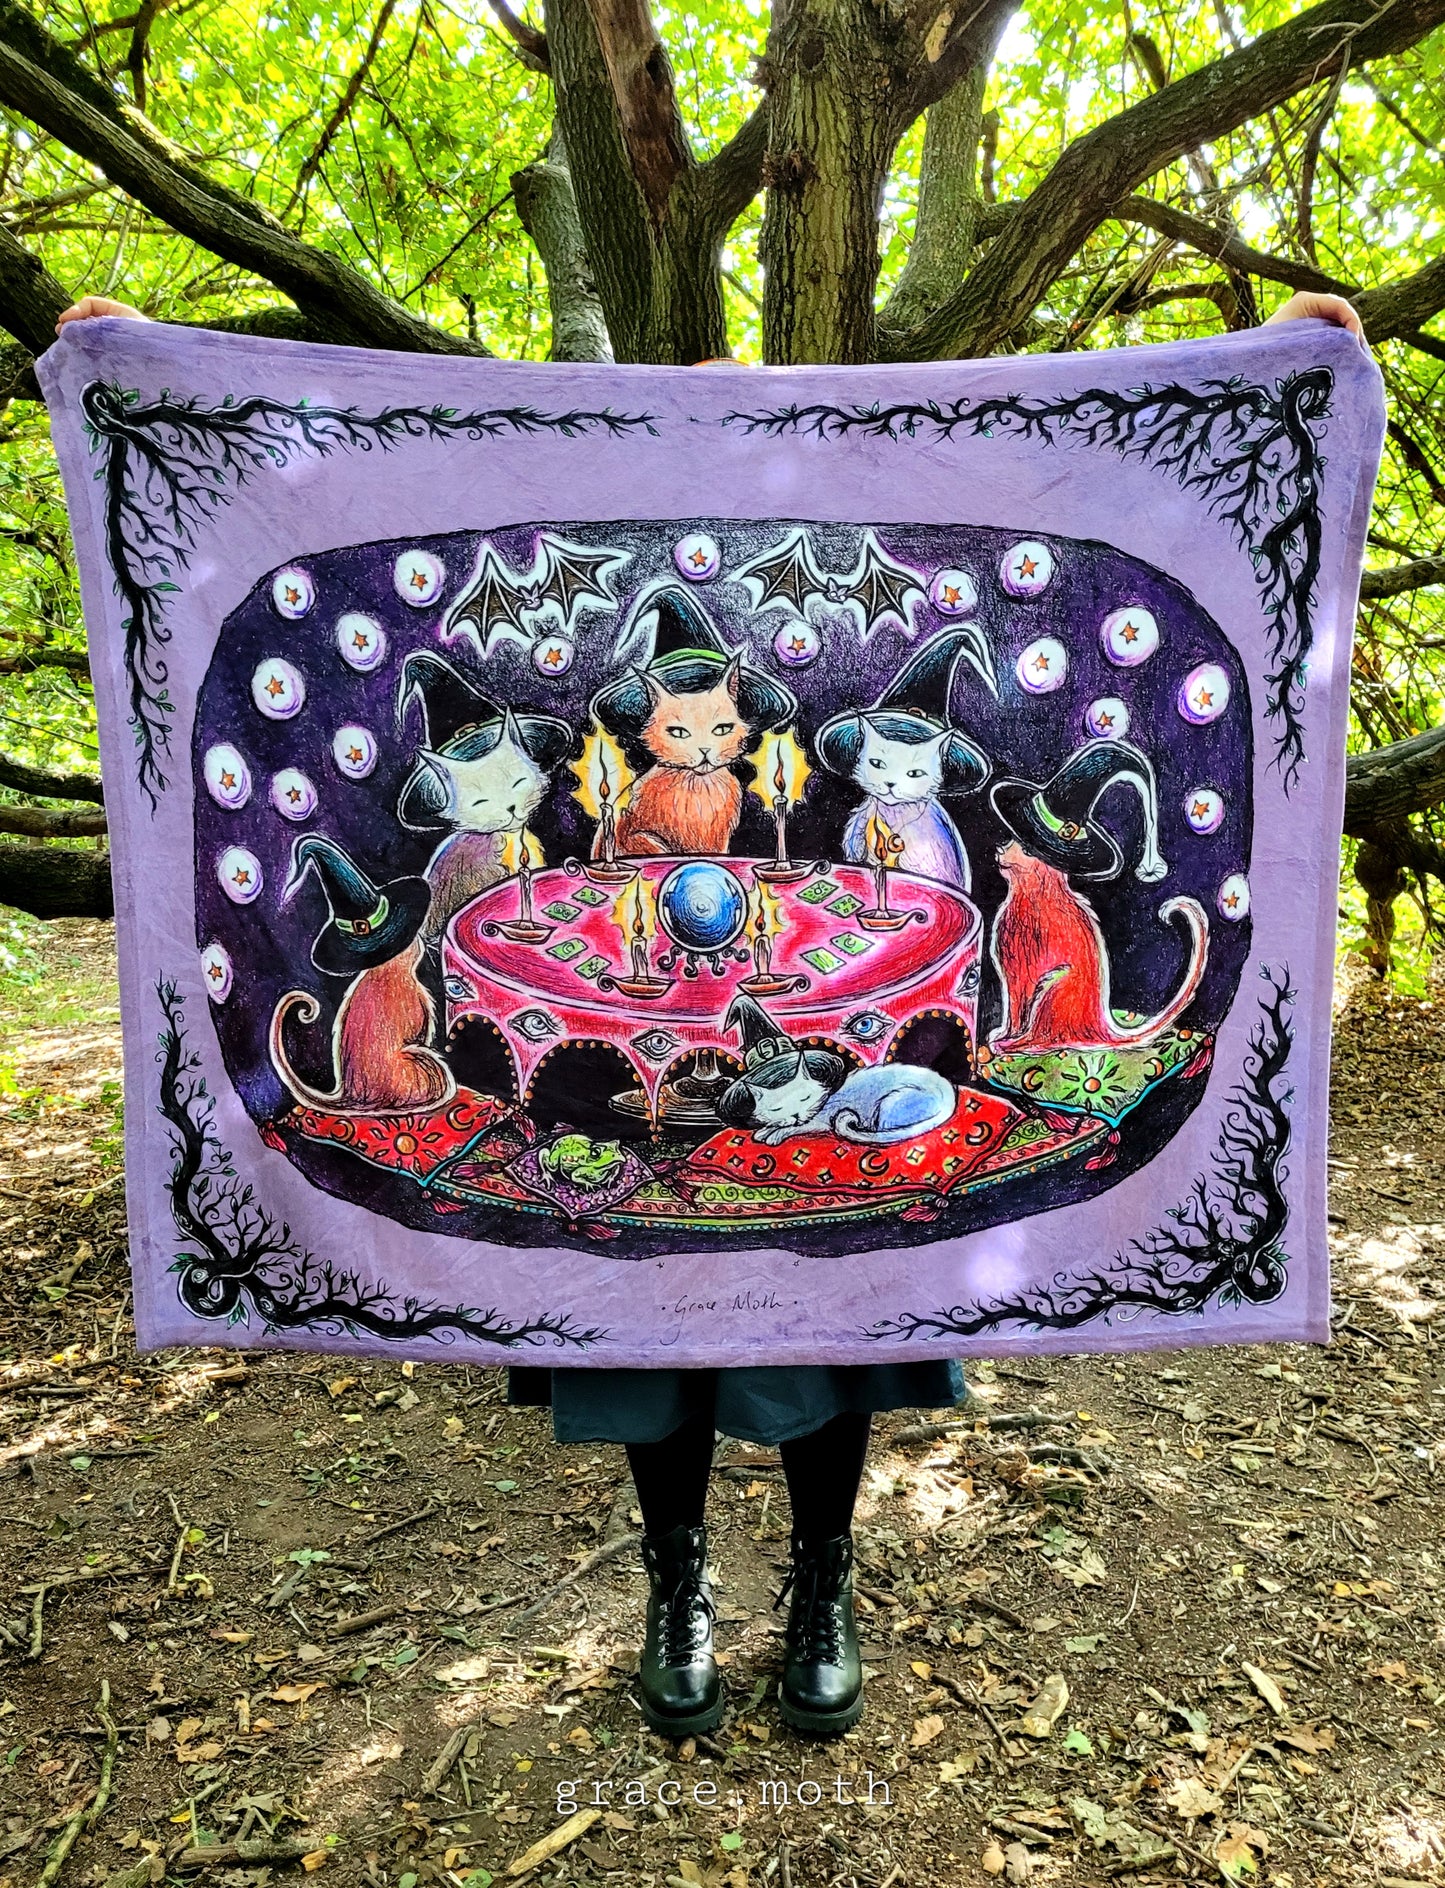 Cat Coven purple throw blanket - witchy gothic original design by Grace Moth - 50" by 60"